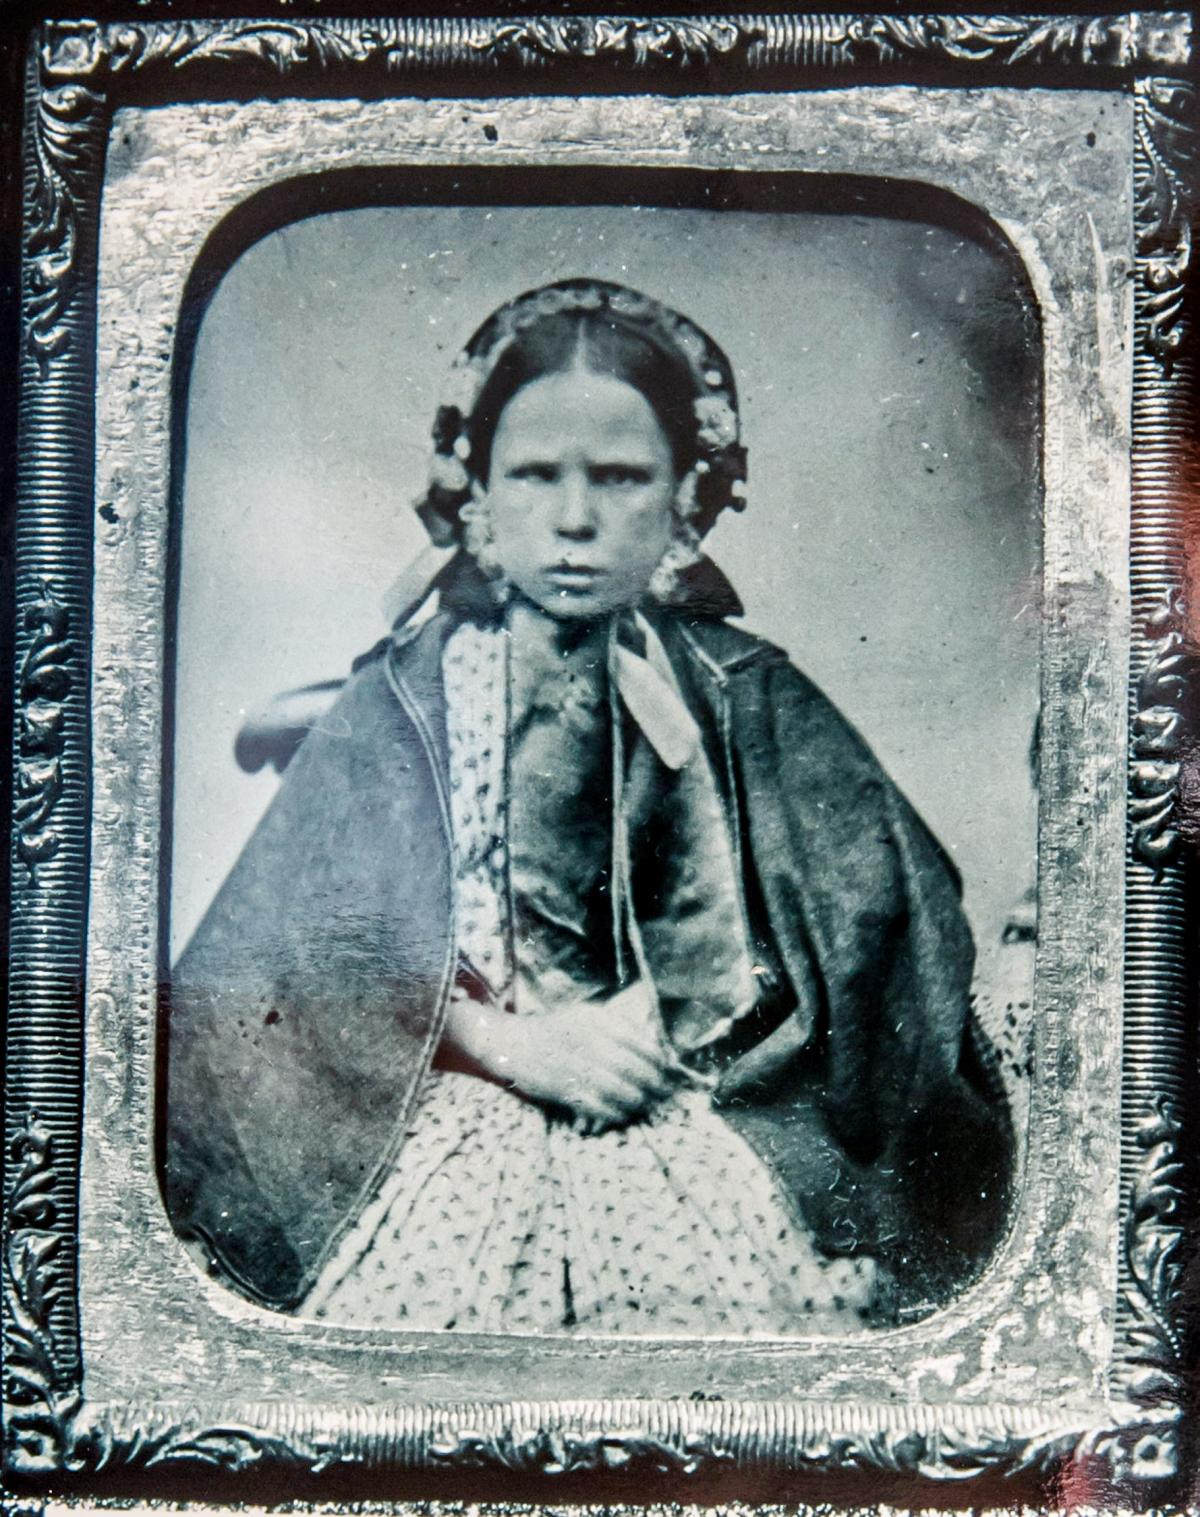 Catherine Legg who was arrested in May 1858 at a fair in Dudley, West Midlands.